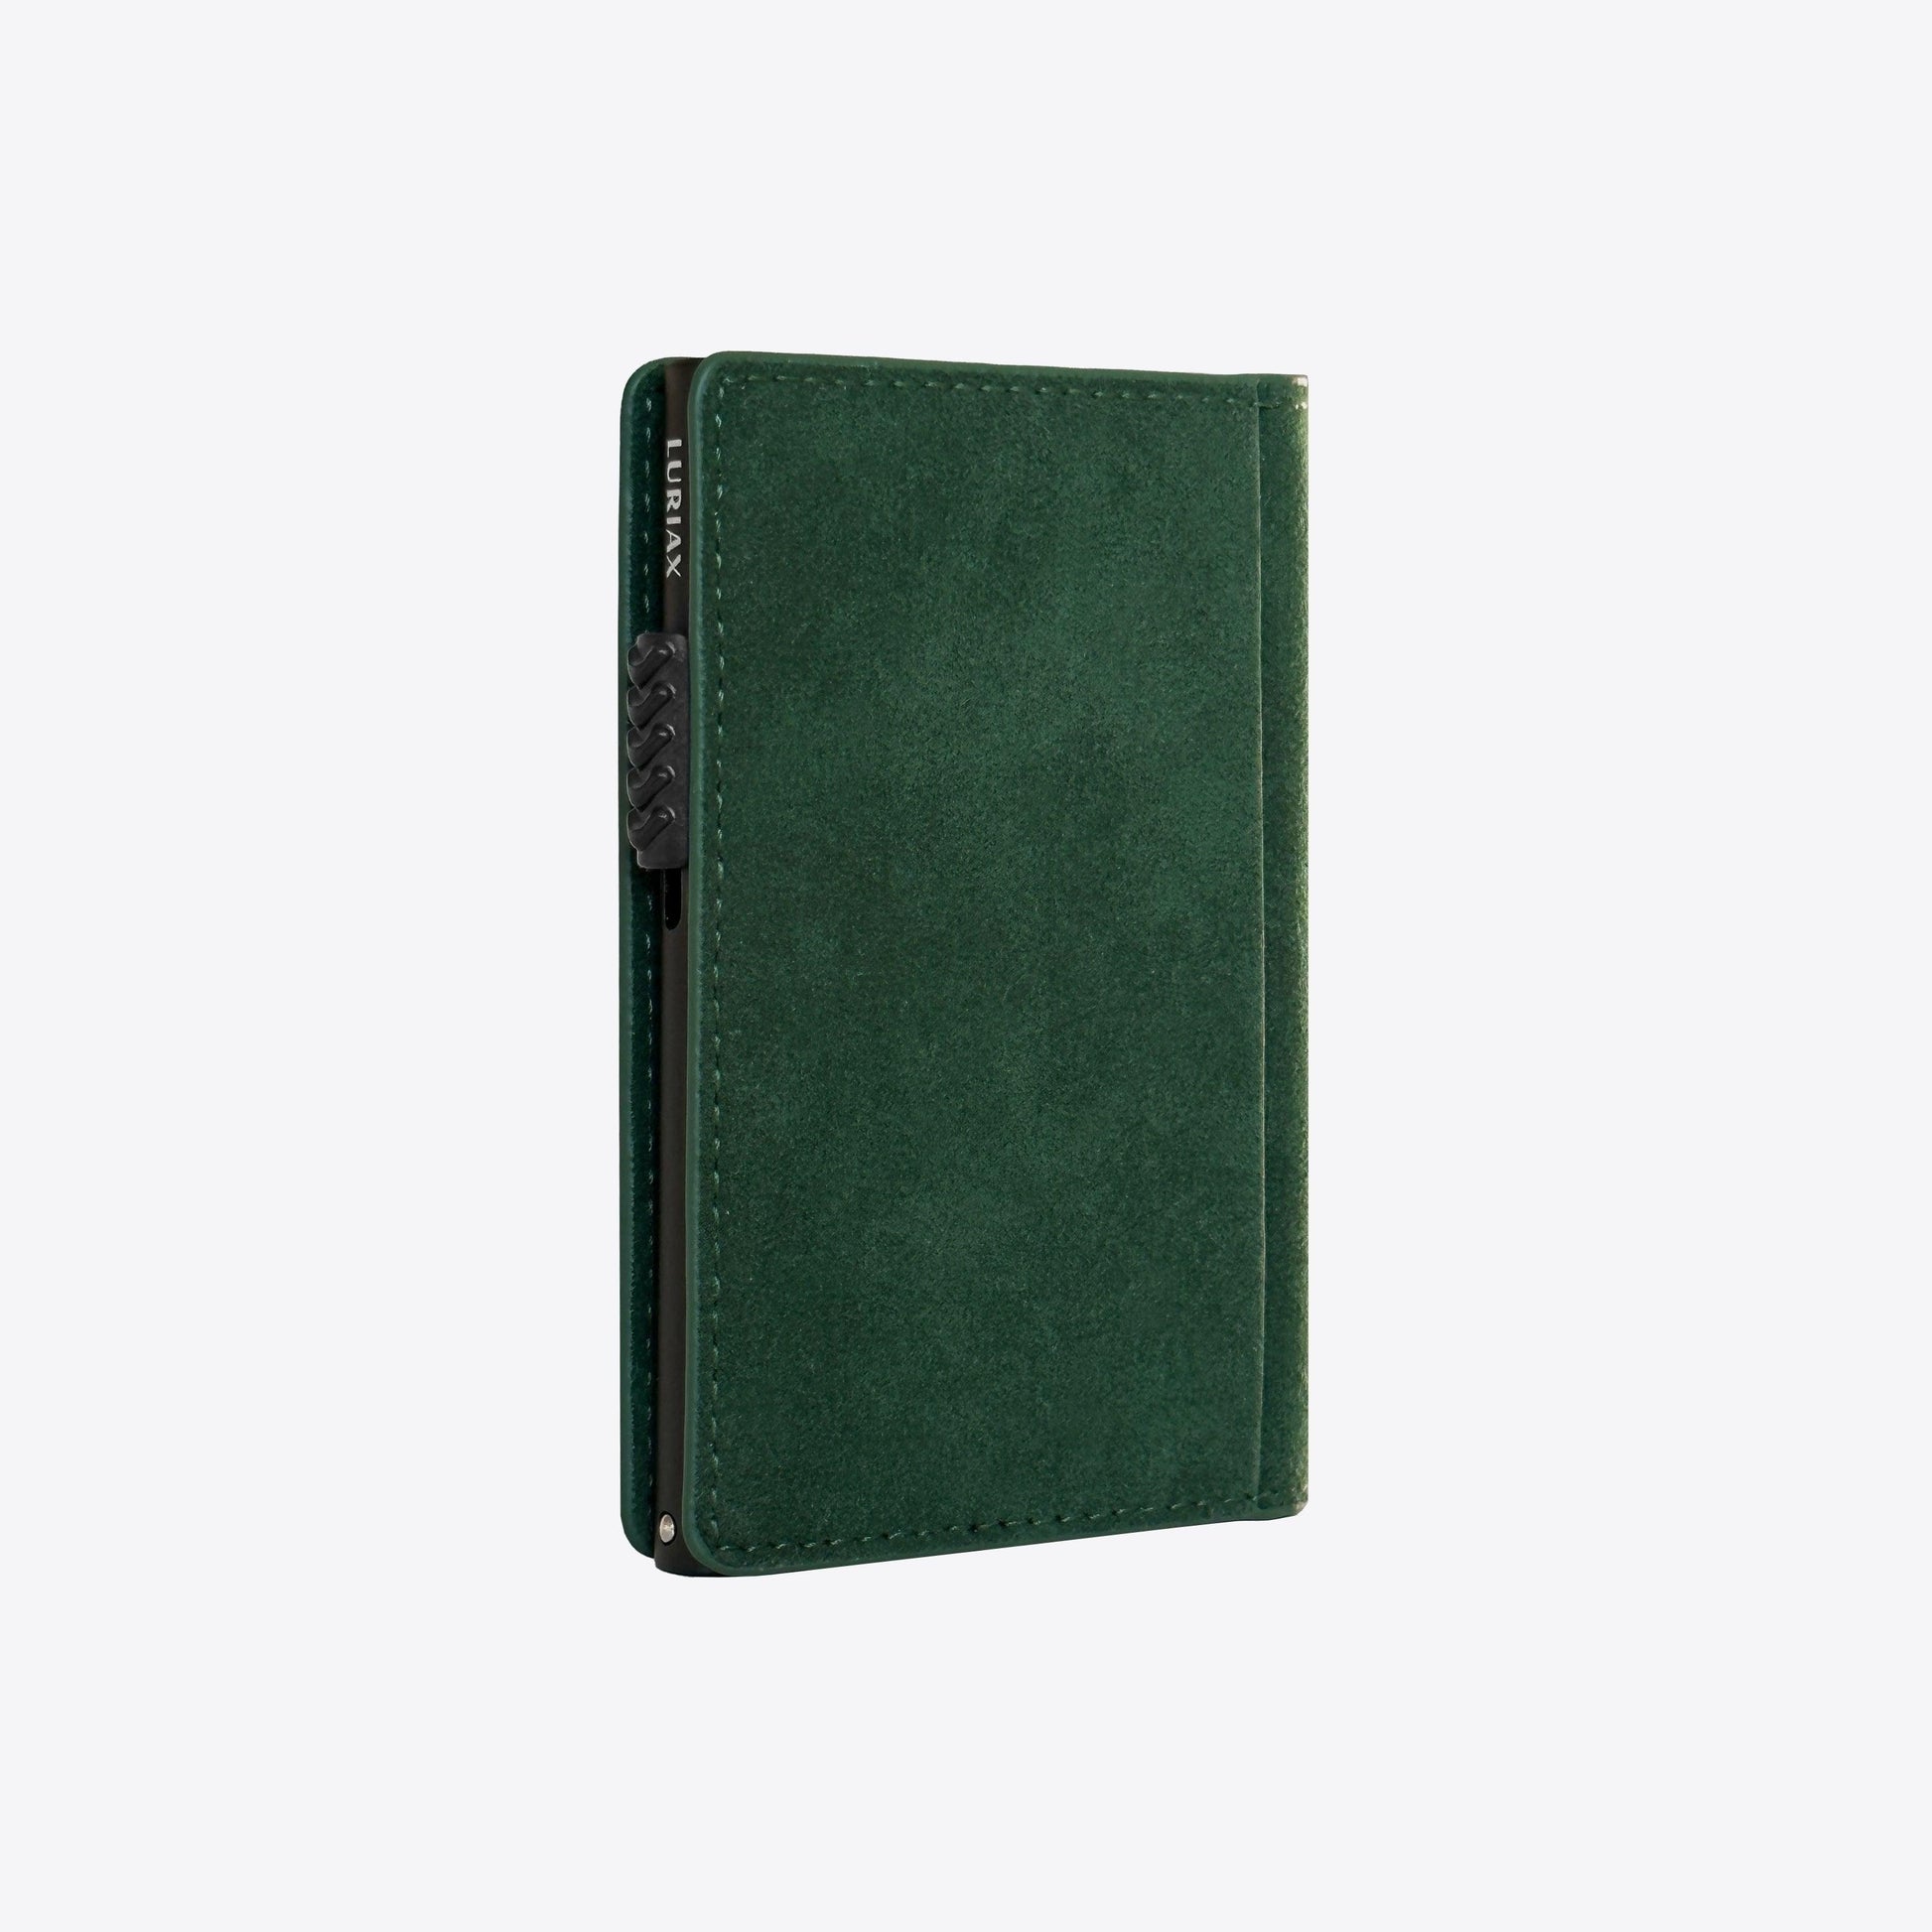 Alcantara Suede Leather iPhone Case and Accessories Collection - The Bifold Cardholder - British Racing Green - Luriax